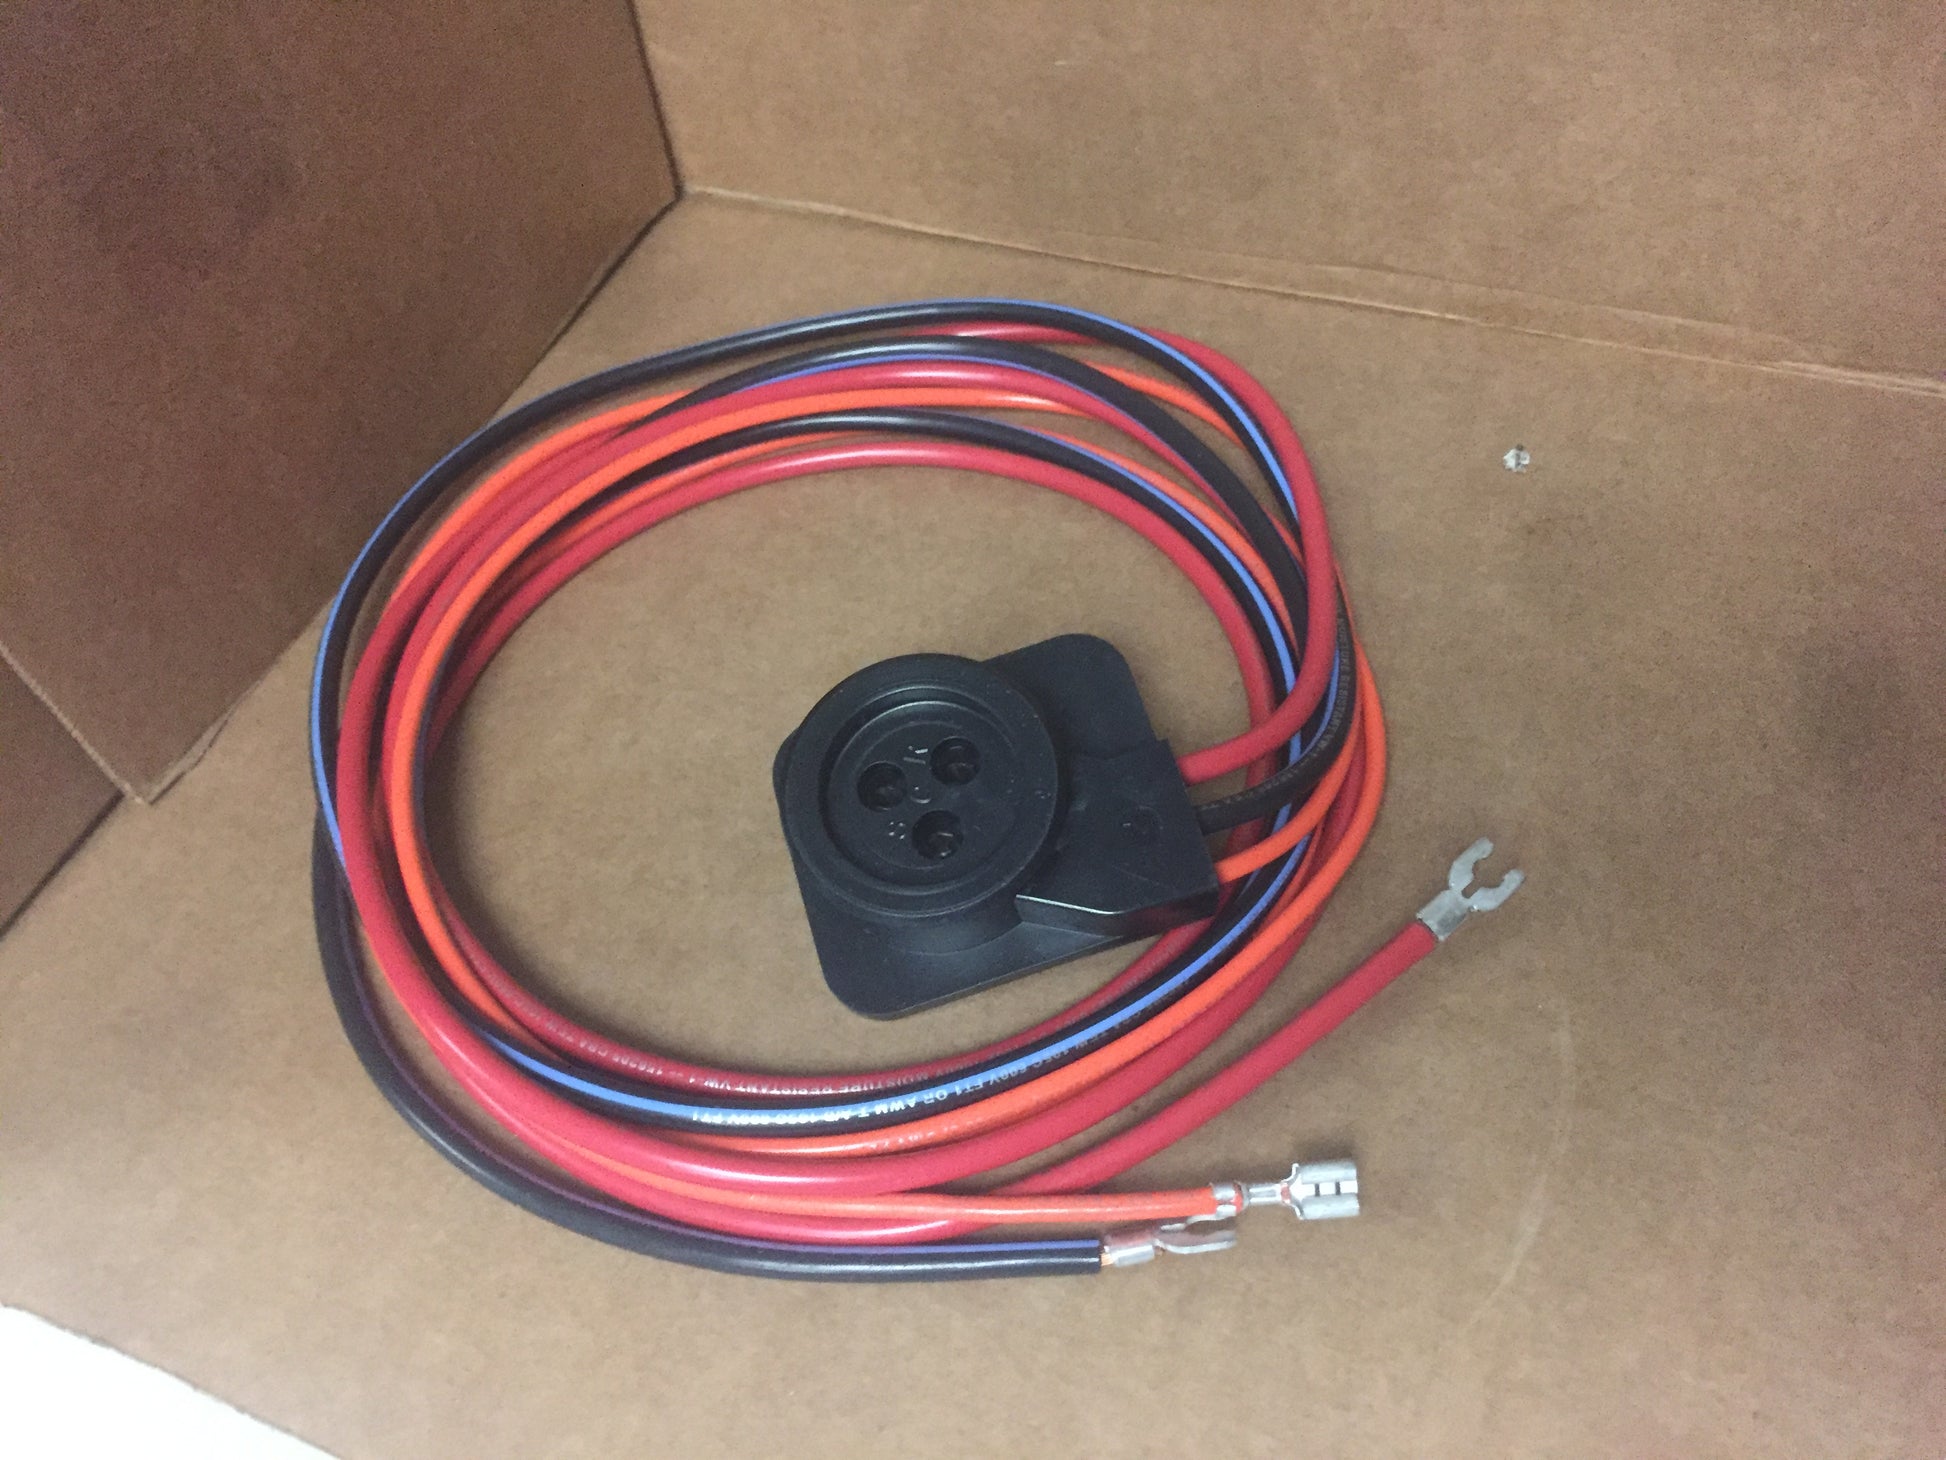 SCROLL COMPRESSOR HARNESS PLUG, BK/BL, OR, RD WIRES, 64 IN LENGTH